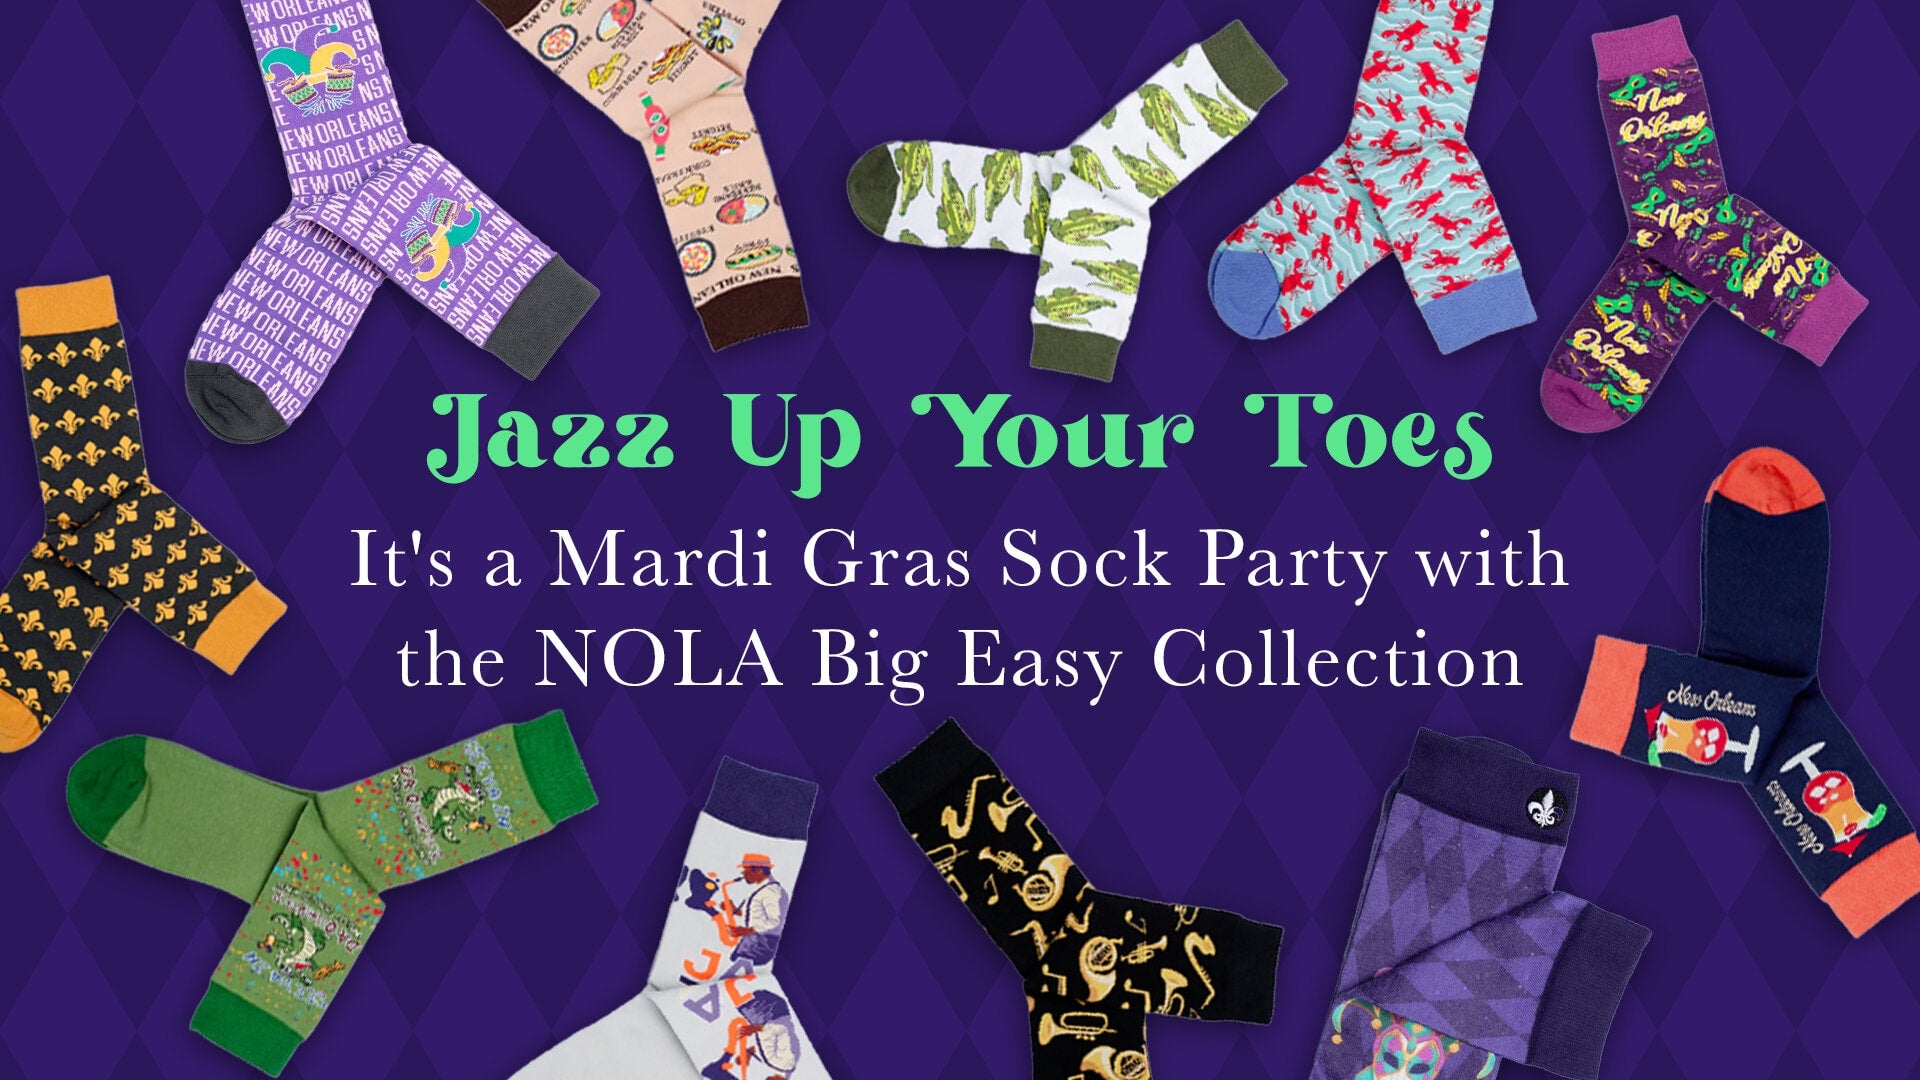 Jazz Up Your Toes It's a Mardi Gras Sock Party with the NOLA Big Easy Collection